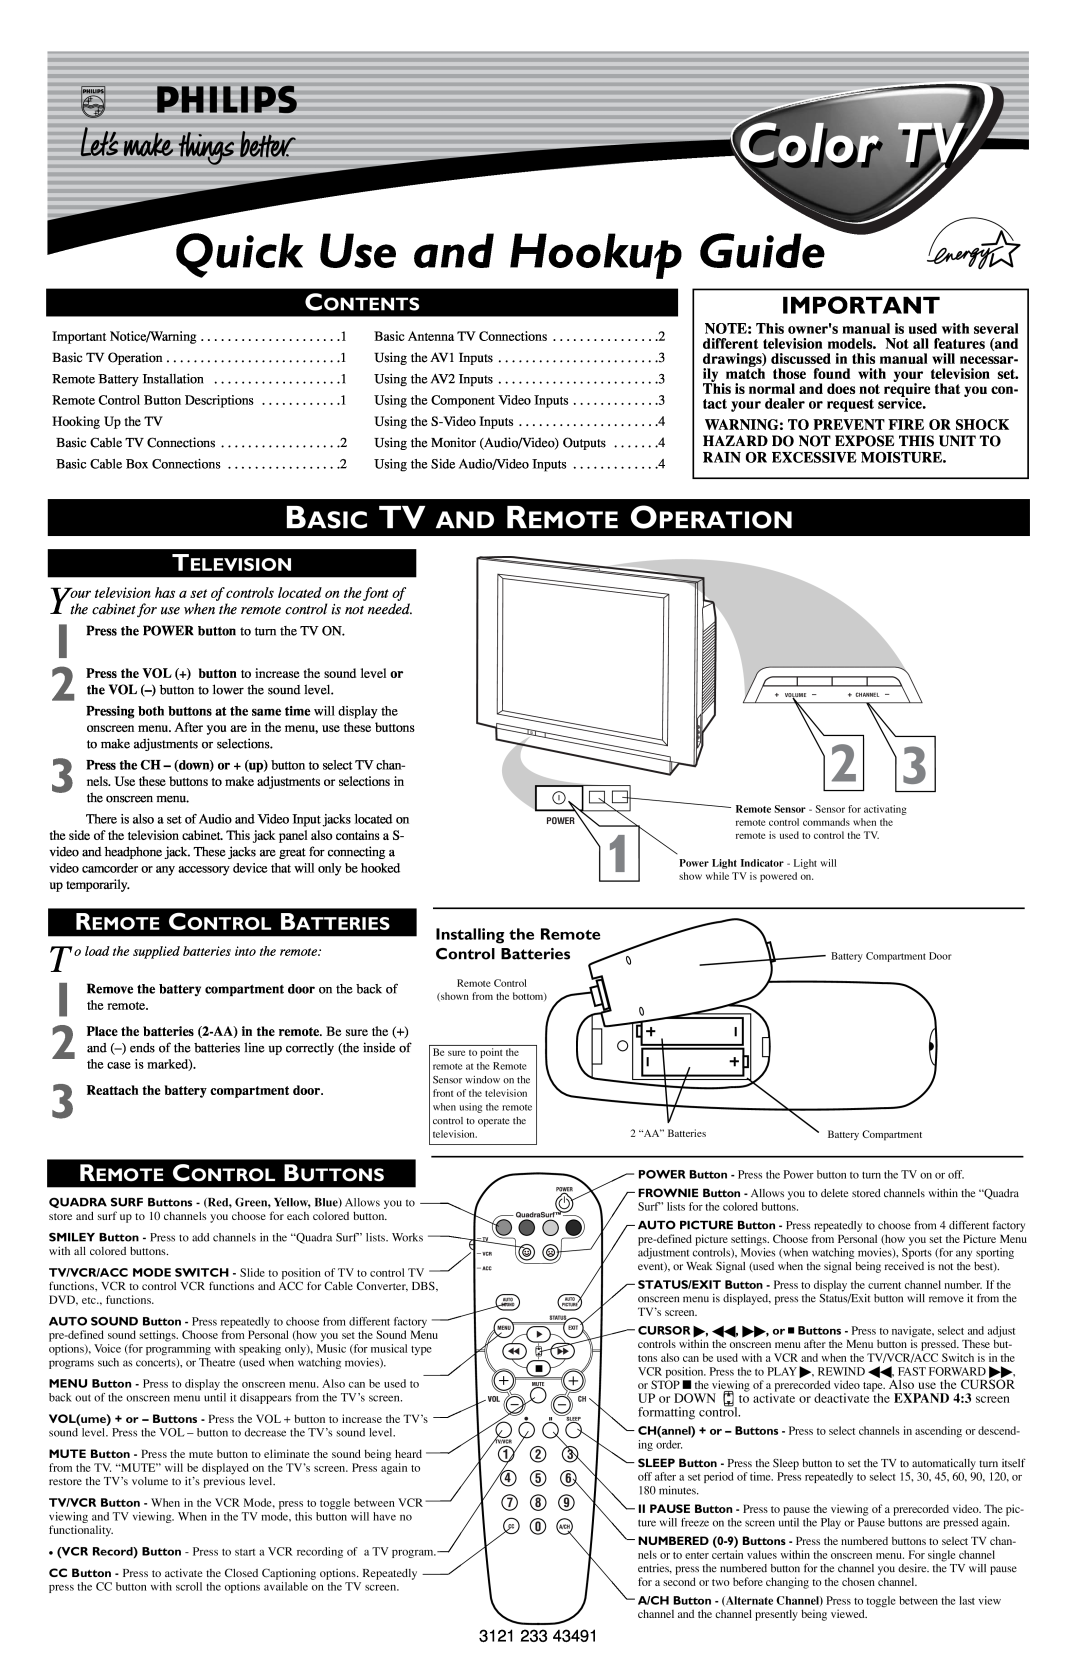 Philips 3121 233 43491 owner manual Basic Tv And Remote Operation, Contents, Television, Remote Control Batteries 